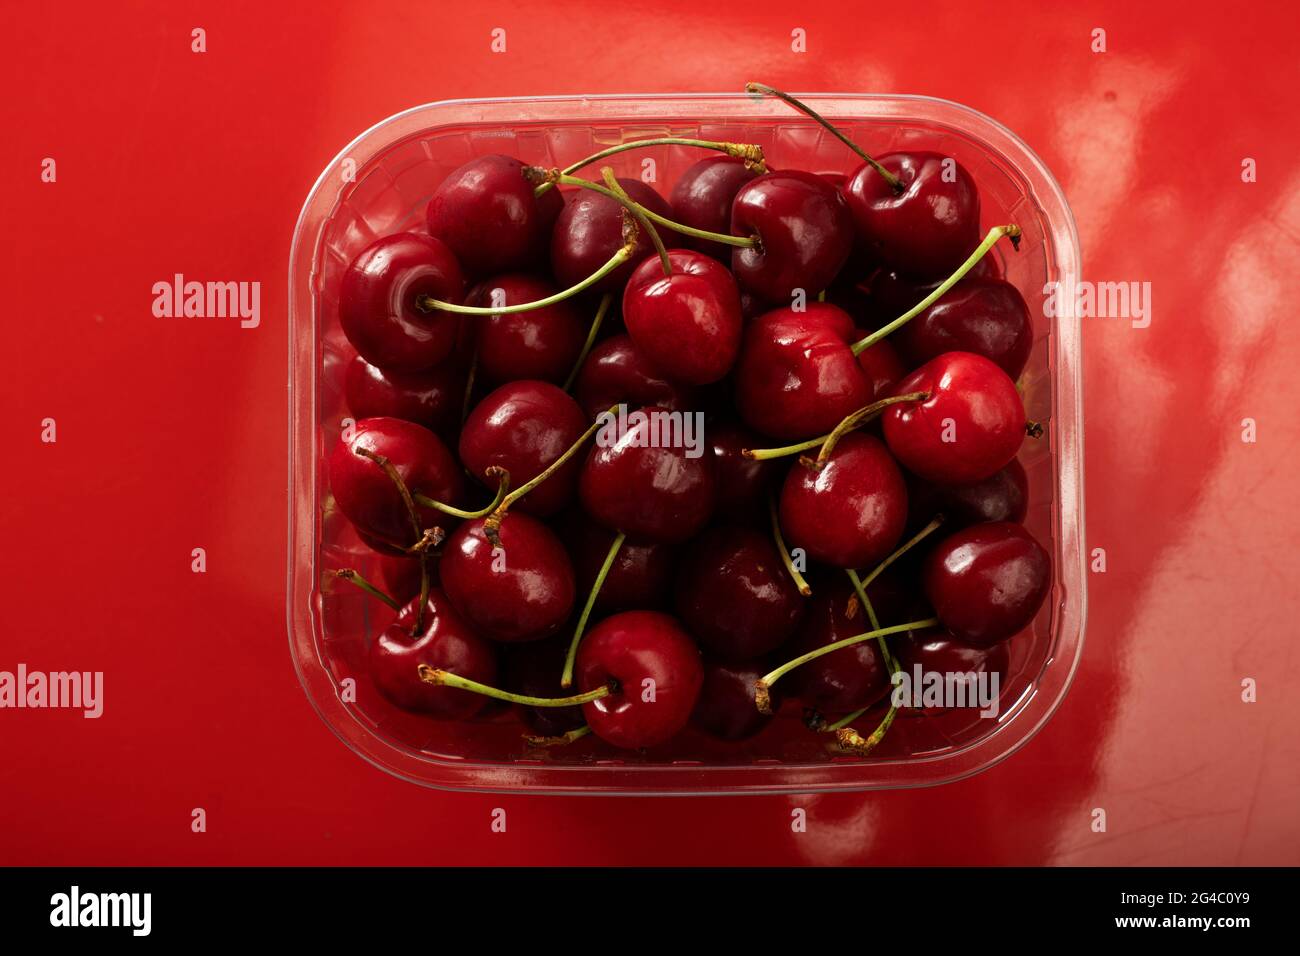 supermarket packaging with cherries Stock Photo